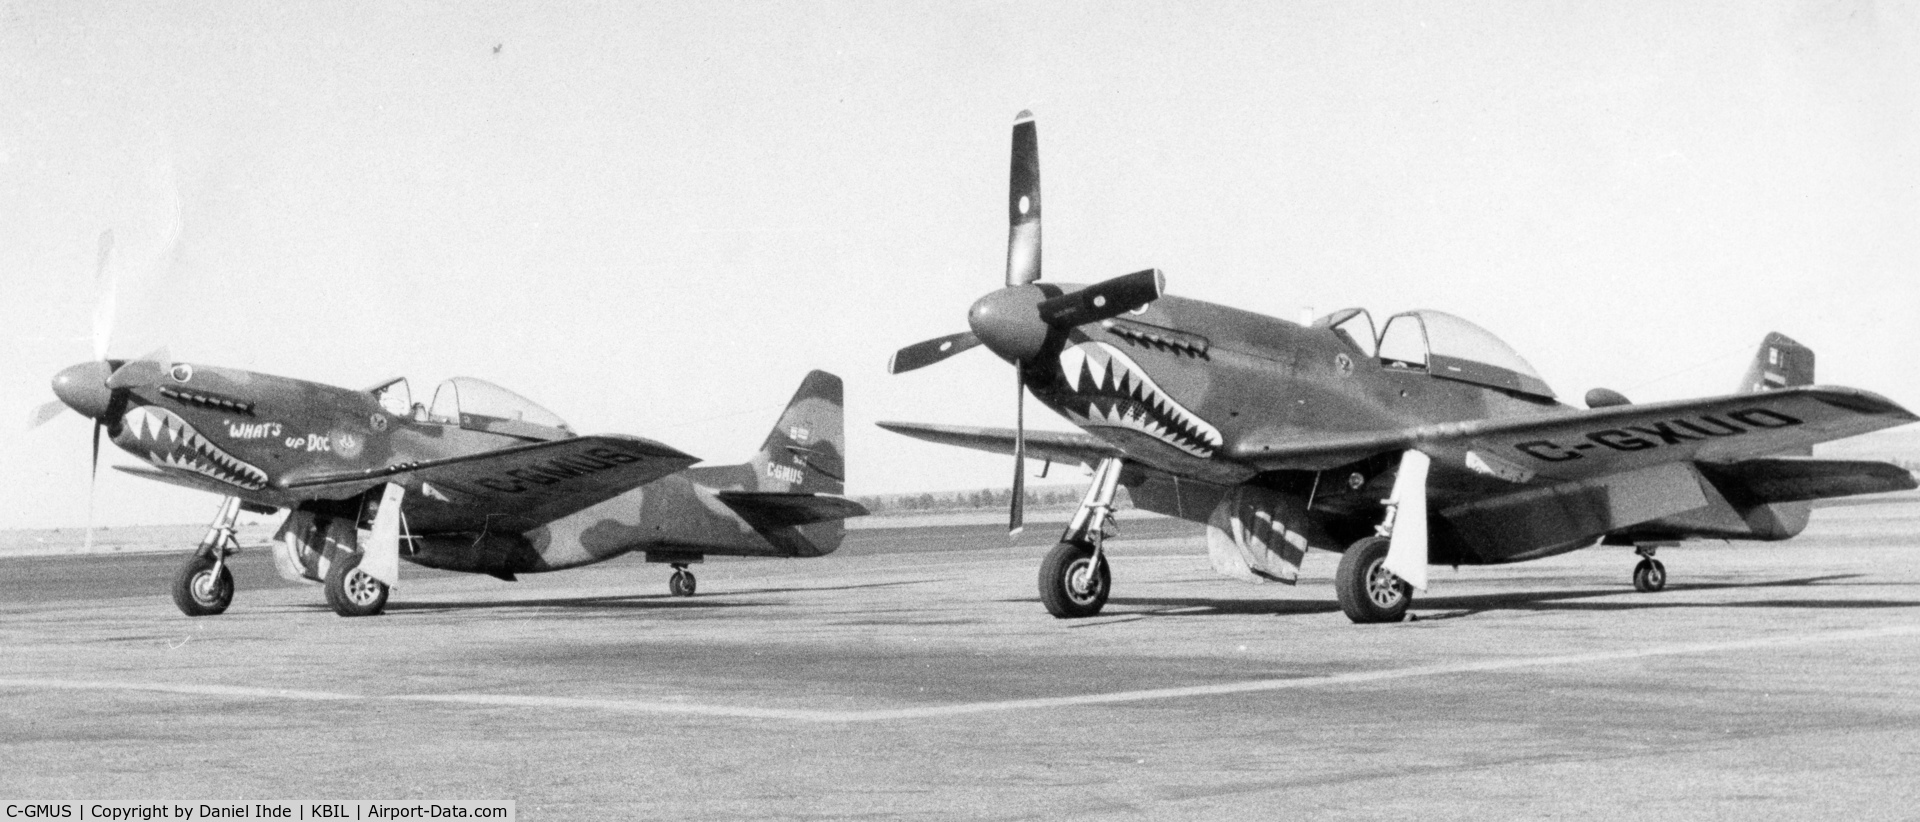 C-GMUS, 1968 North American F-51D Mustang Mustang C/N AF6722581, C-GMUS along side C-GXUO at BIL for a fuel stop.  1983